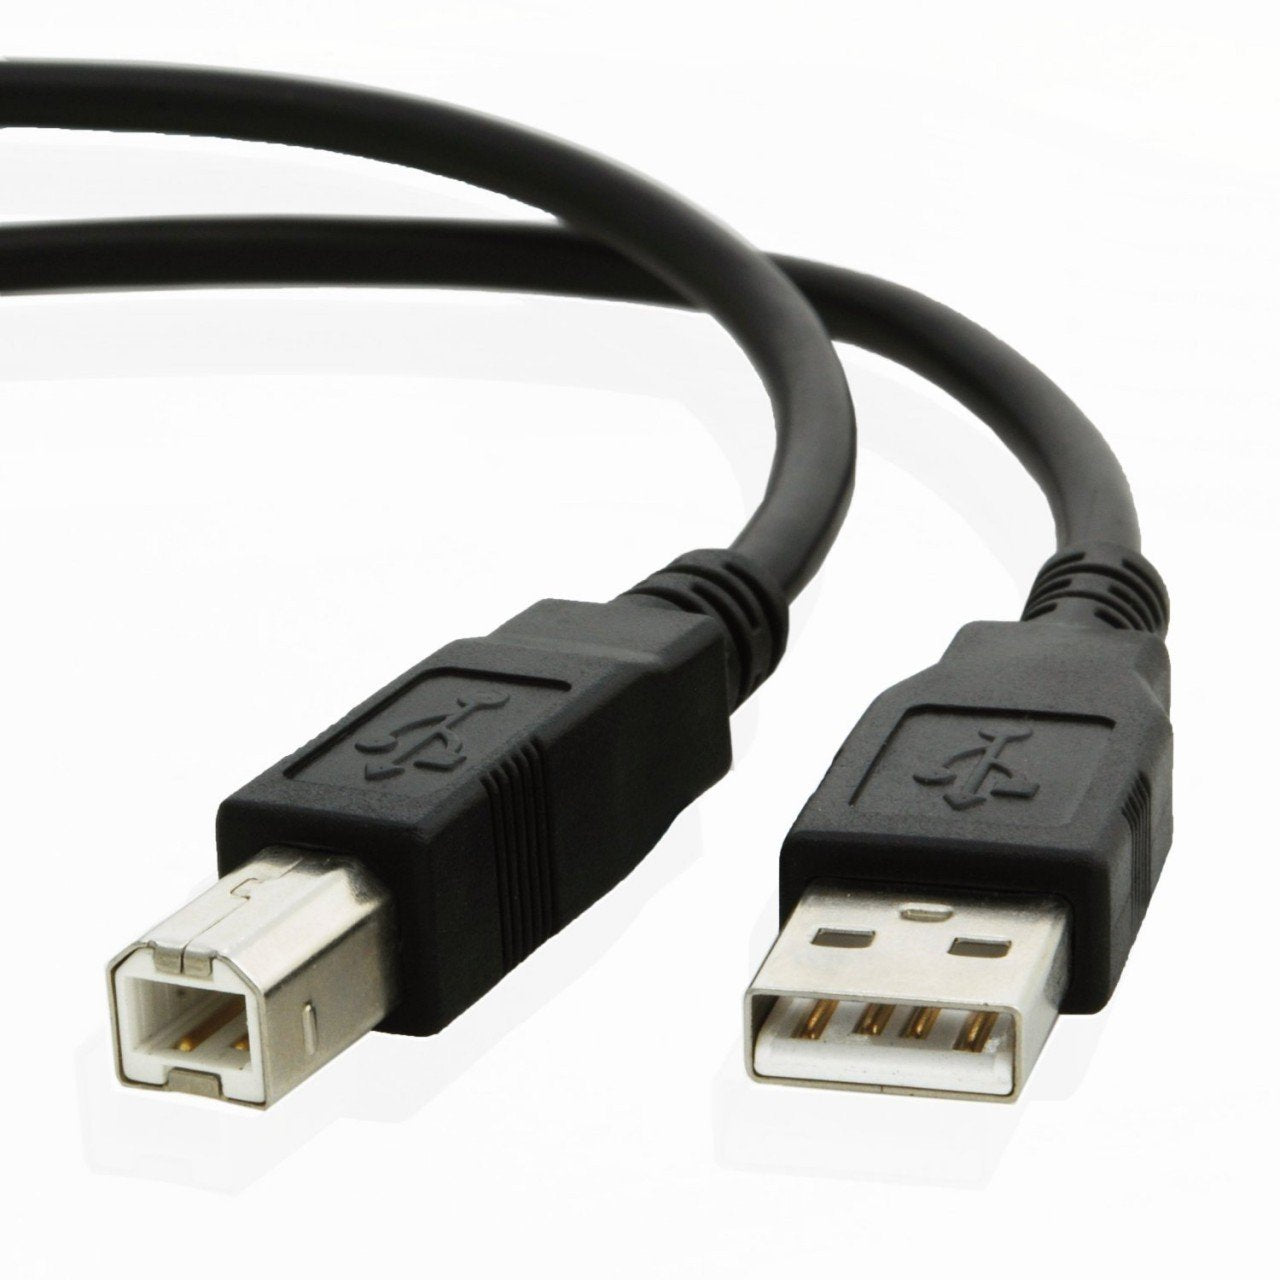 USB cable for Brother MFC-J680W